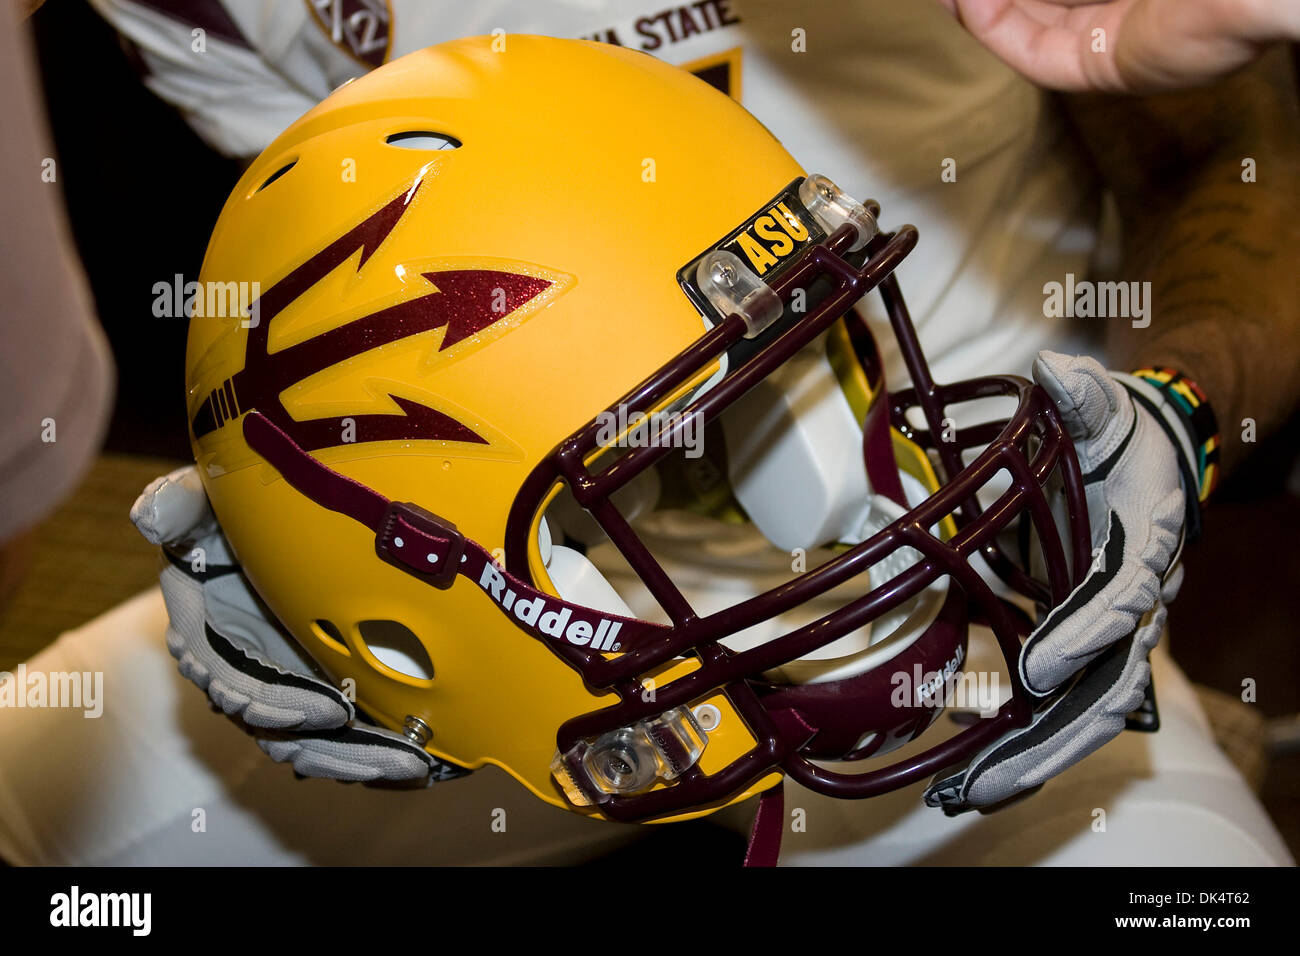 Apr. 12, 2011 - Tempe, Arizona, U.S - Arizona State University unveils a new look for the athletic program with a new logo on the helmet during a public launch at the Memorial Union on the ASU campus in Tempe, Arizona. (Credit Image: © Gene Lower/Southcreek Global/ZUMAPRESS.com) Stock Photo